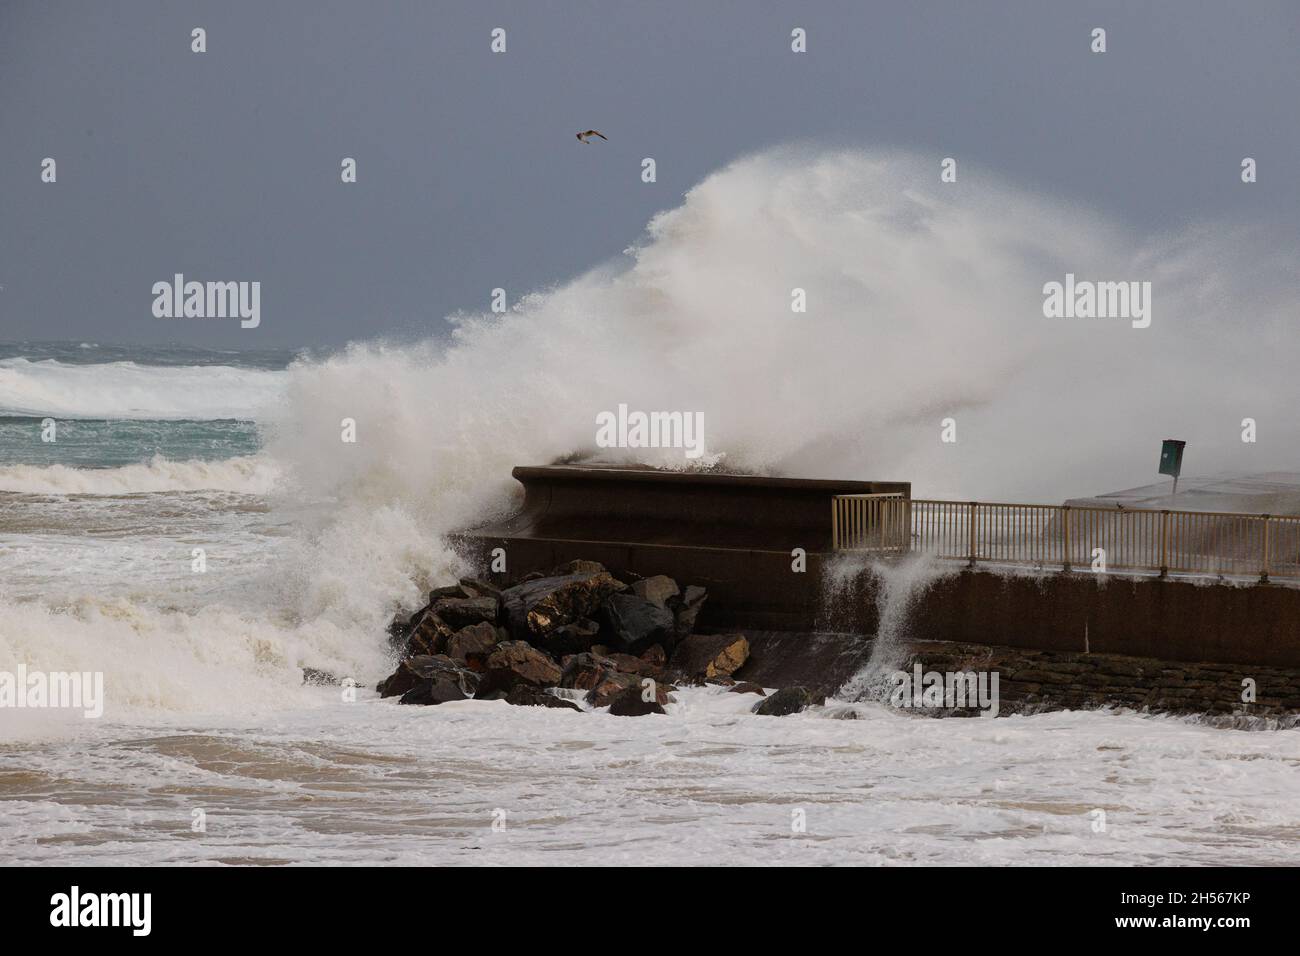 Thurso, Scotland. Nov. 7 2021. Waves generated by gale force winds batter a seawall in Thurso, Scotland. Stock Photo